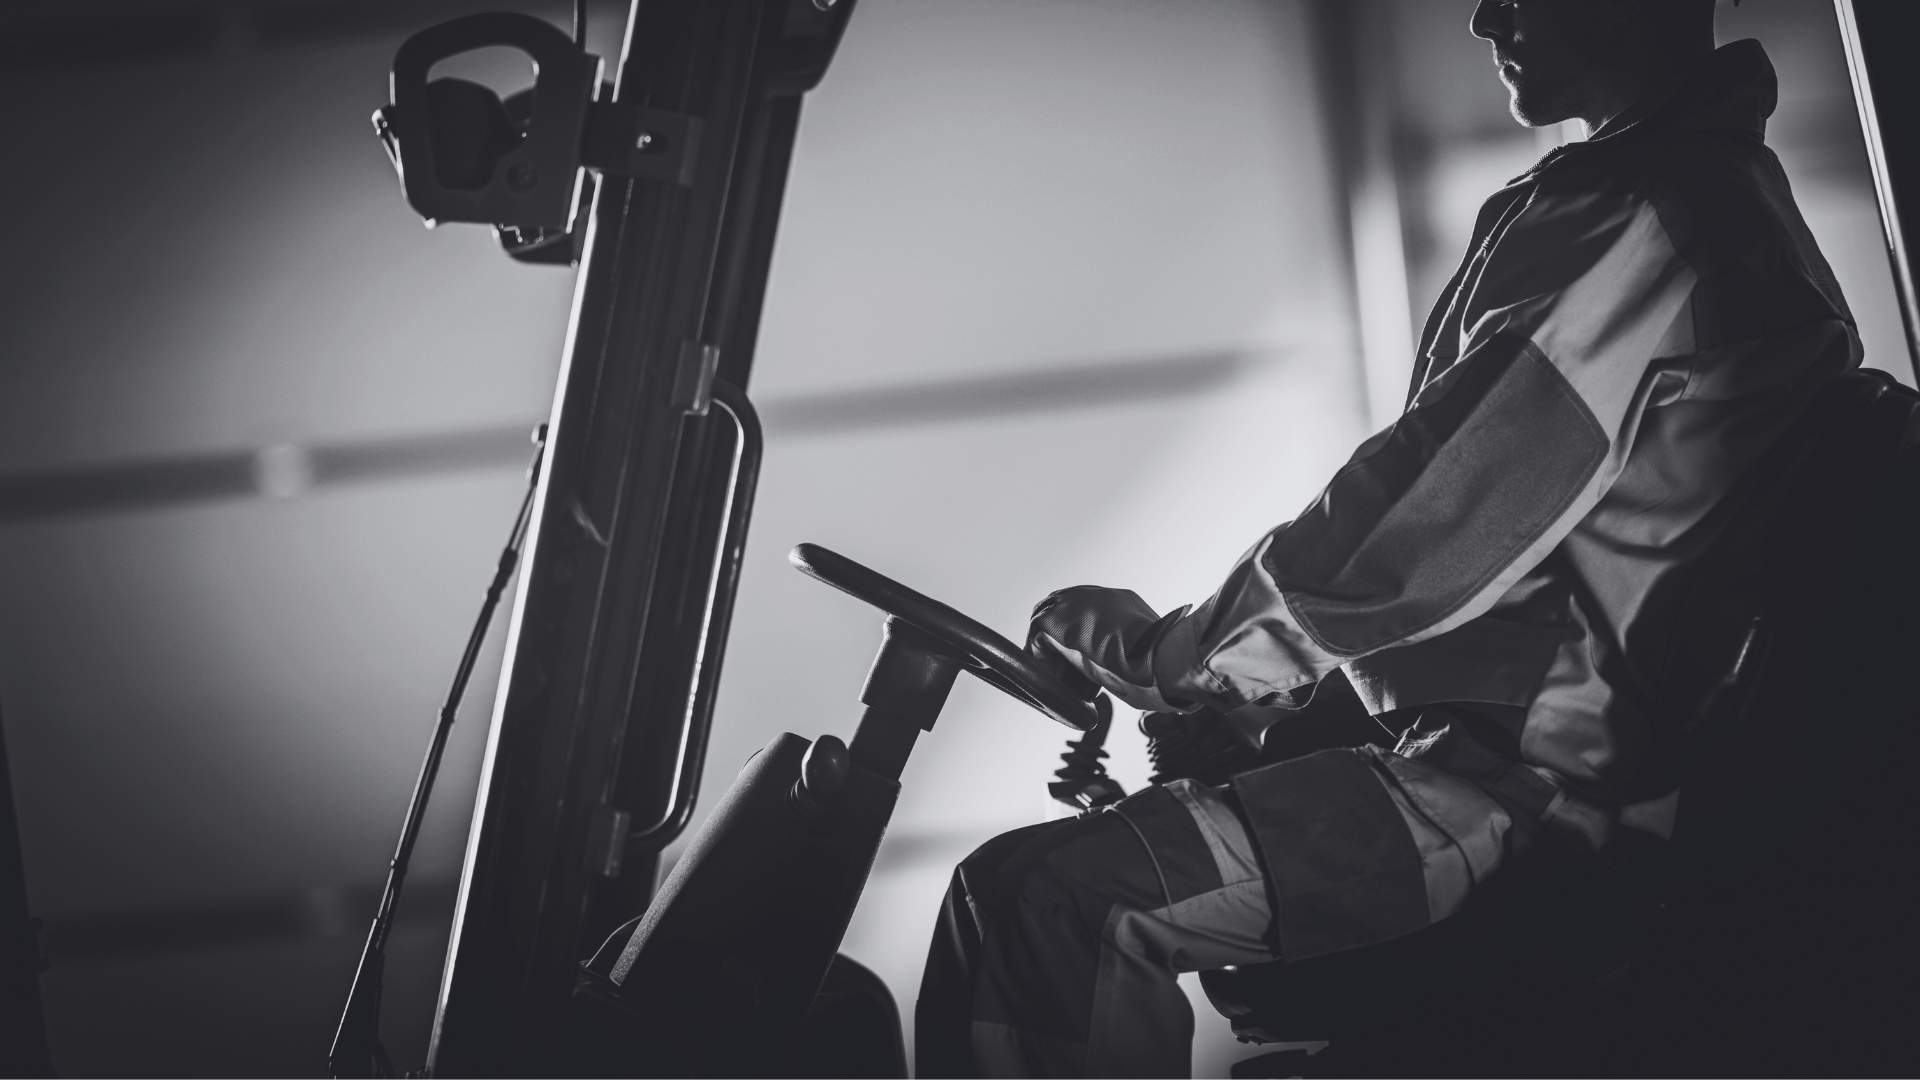 Close up black and white image of a man operating a forklift